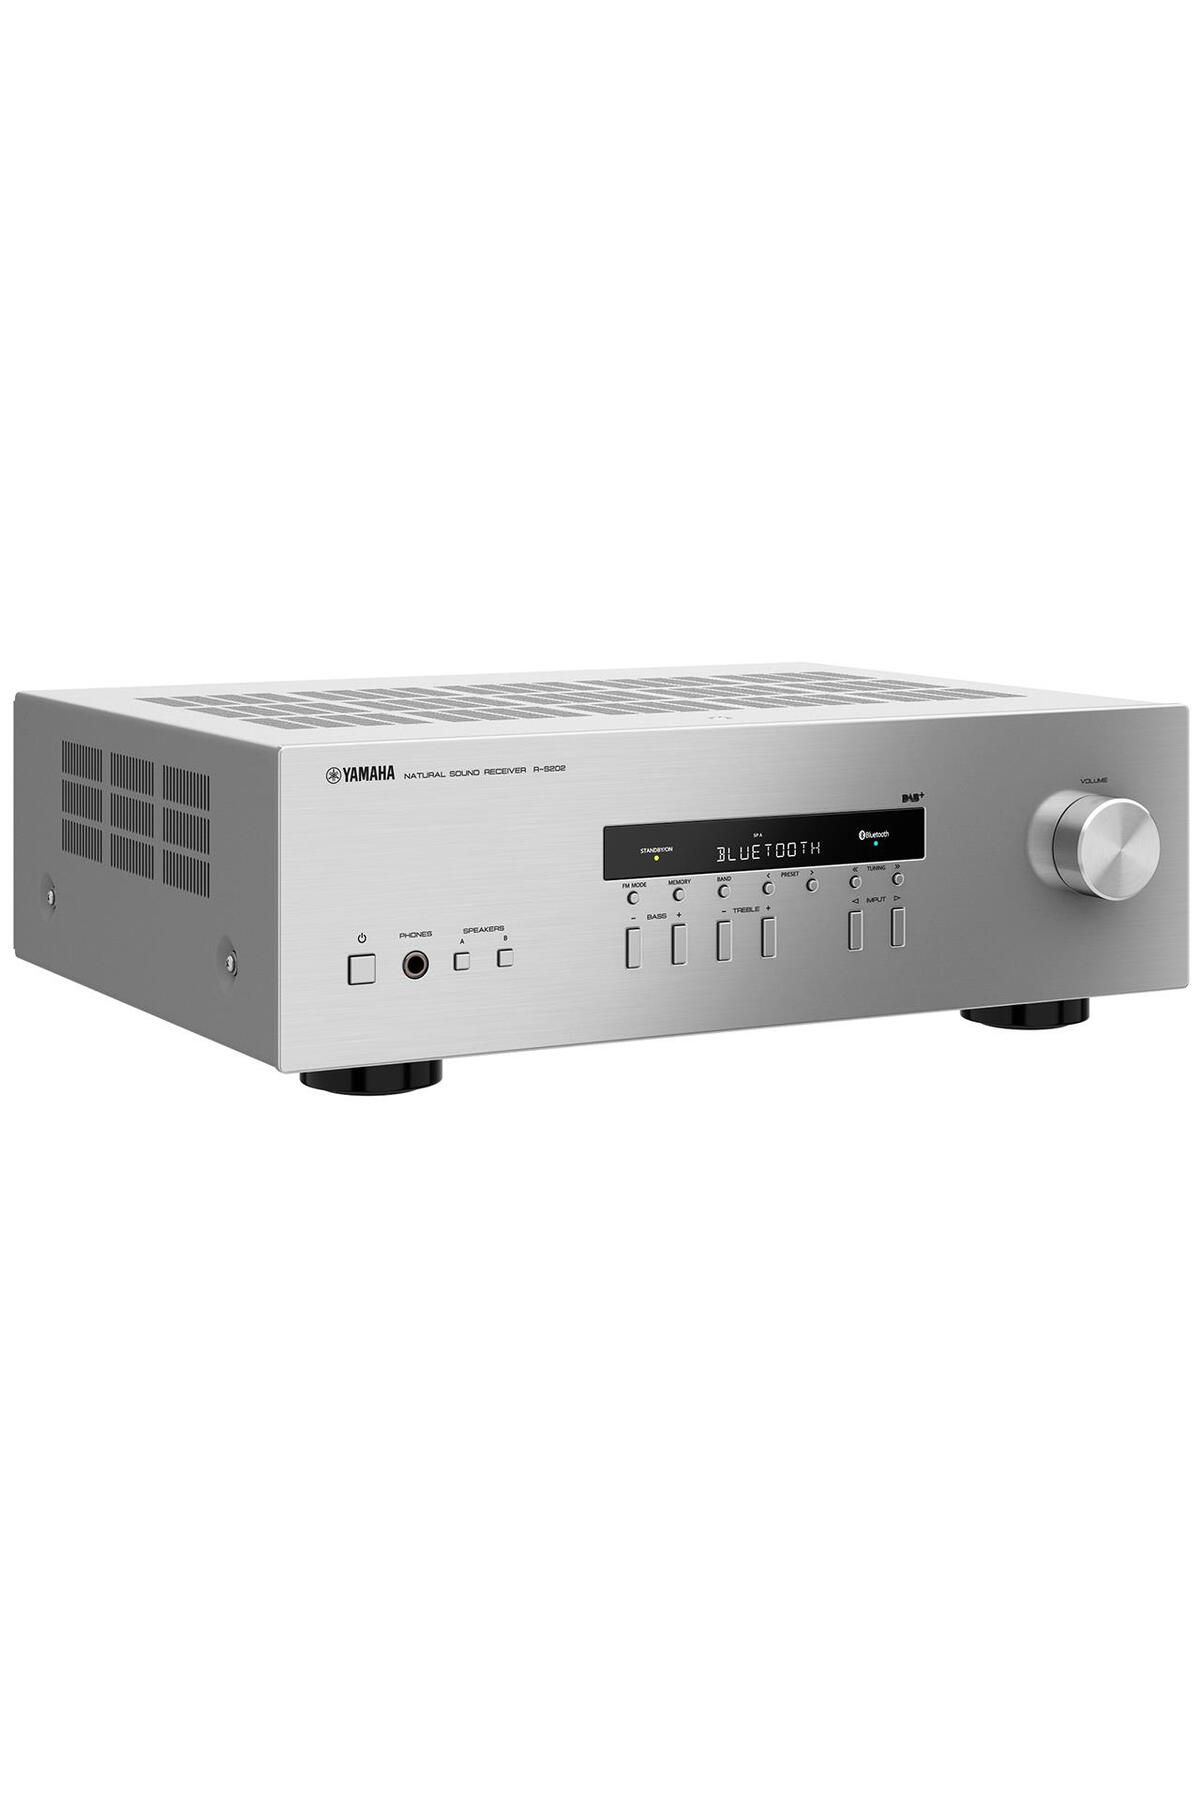 Yamaha Rs 202d Stereo Receiver Gri